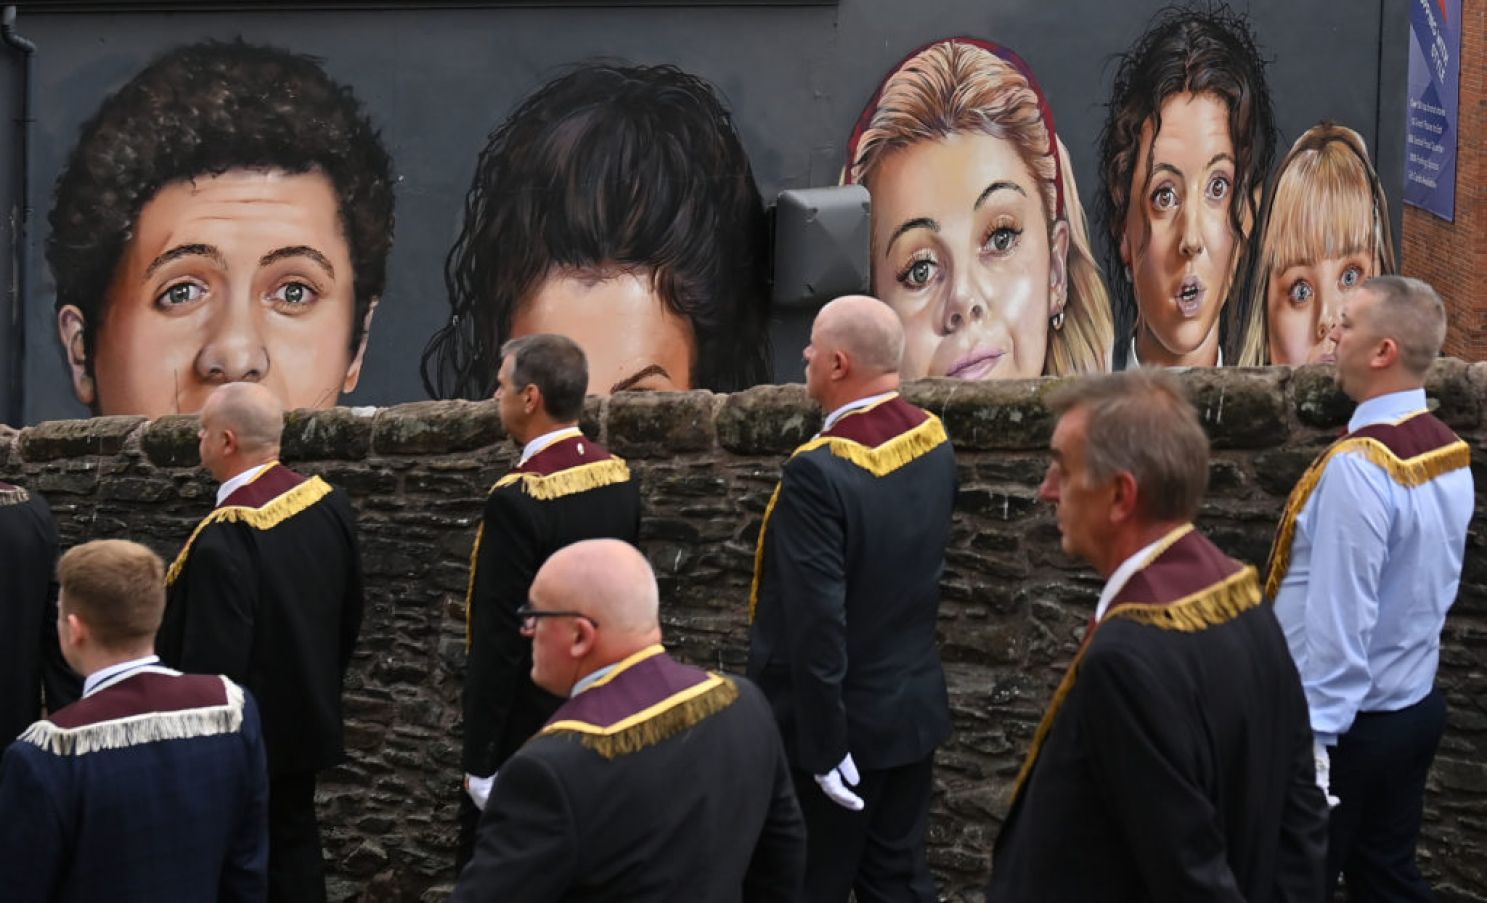 The Apprentice Boys March Past The Derry Girls Mural. The Annual March On August 12Th In Derry City Was Scaled Back Due To Covid-19 This Year. Photo: Charles Mcquillan/Getty